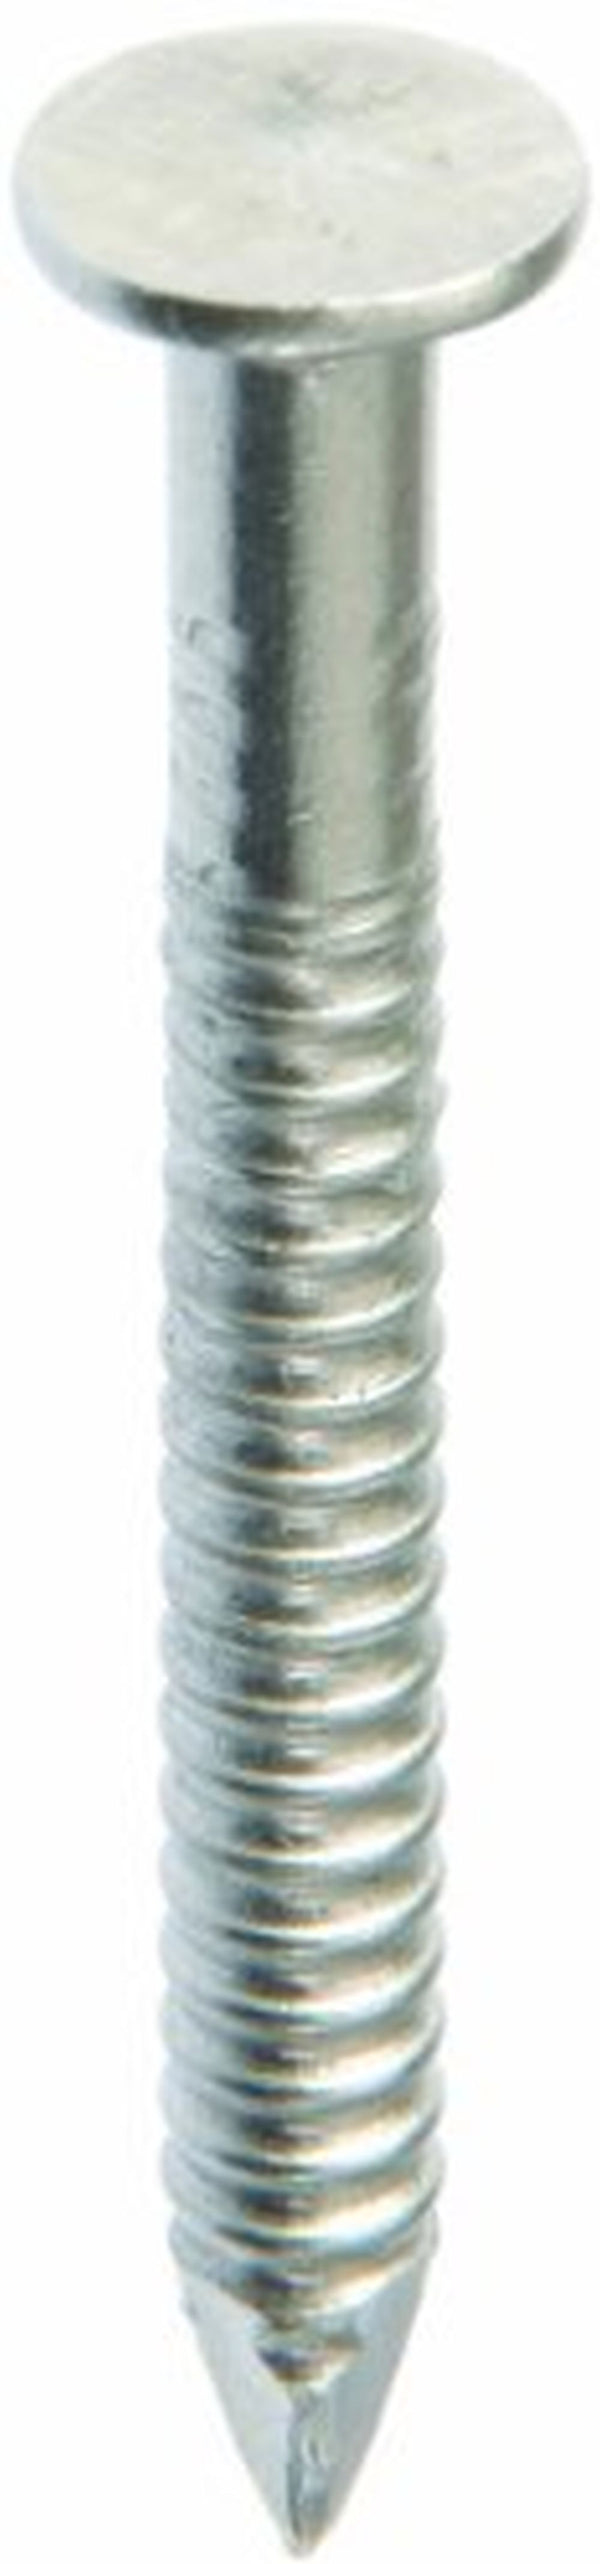 Grip Rite MAXN112RSRFG304BK 1-1/2 in. 4D 304 Stainless Steel Roofing Nail (25 lbs. Pack)